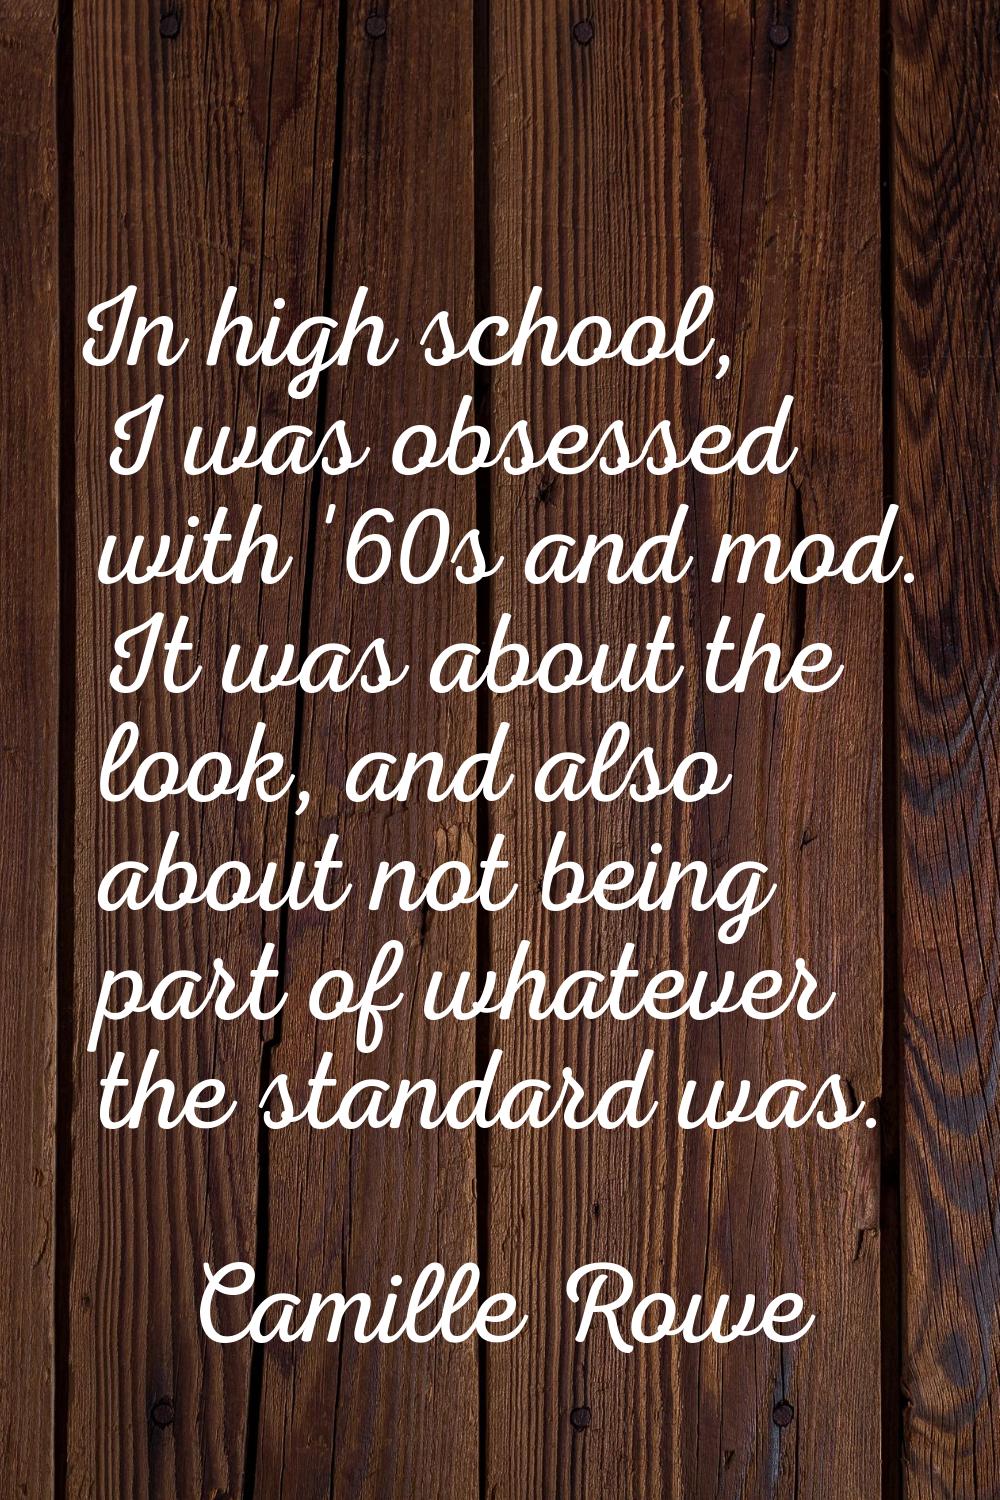 In high school, I was obsessed with '60s and mod. It was about the look, and also about not being p